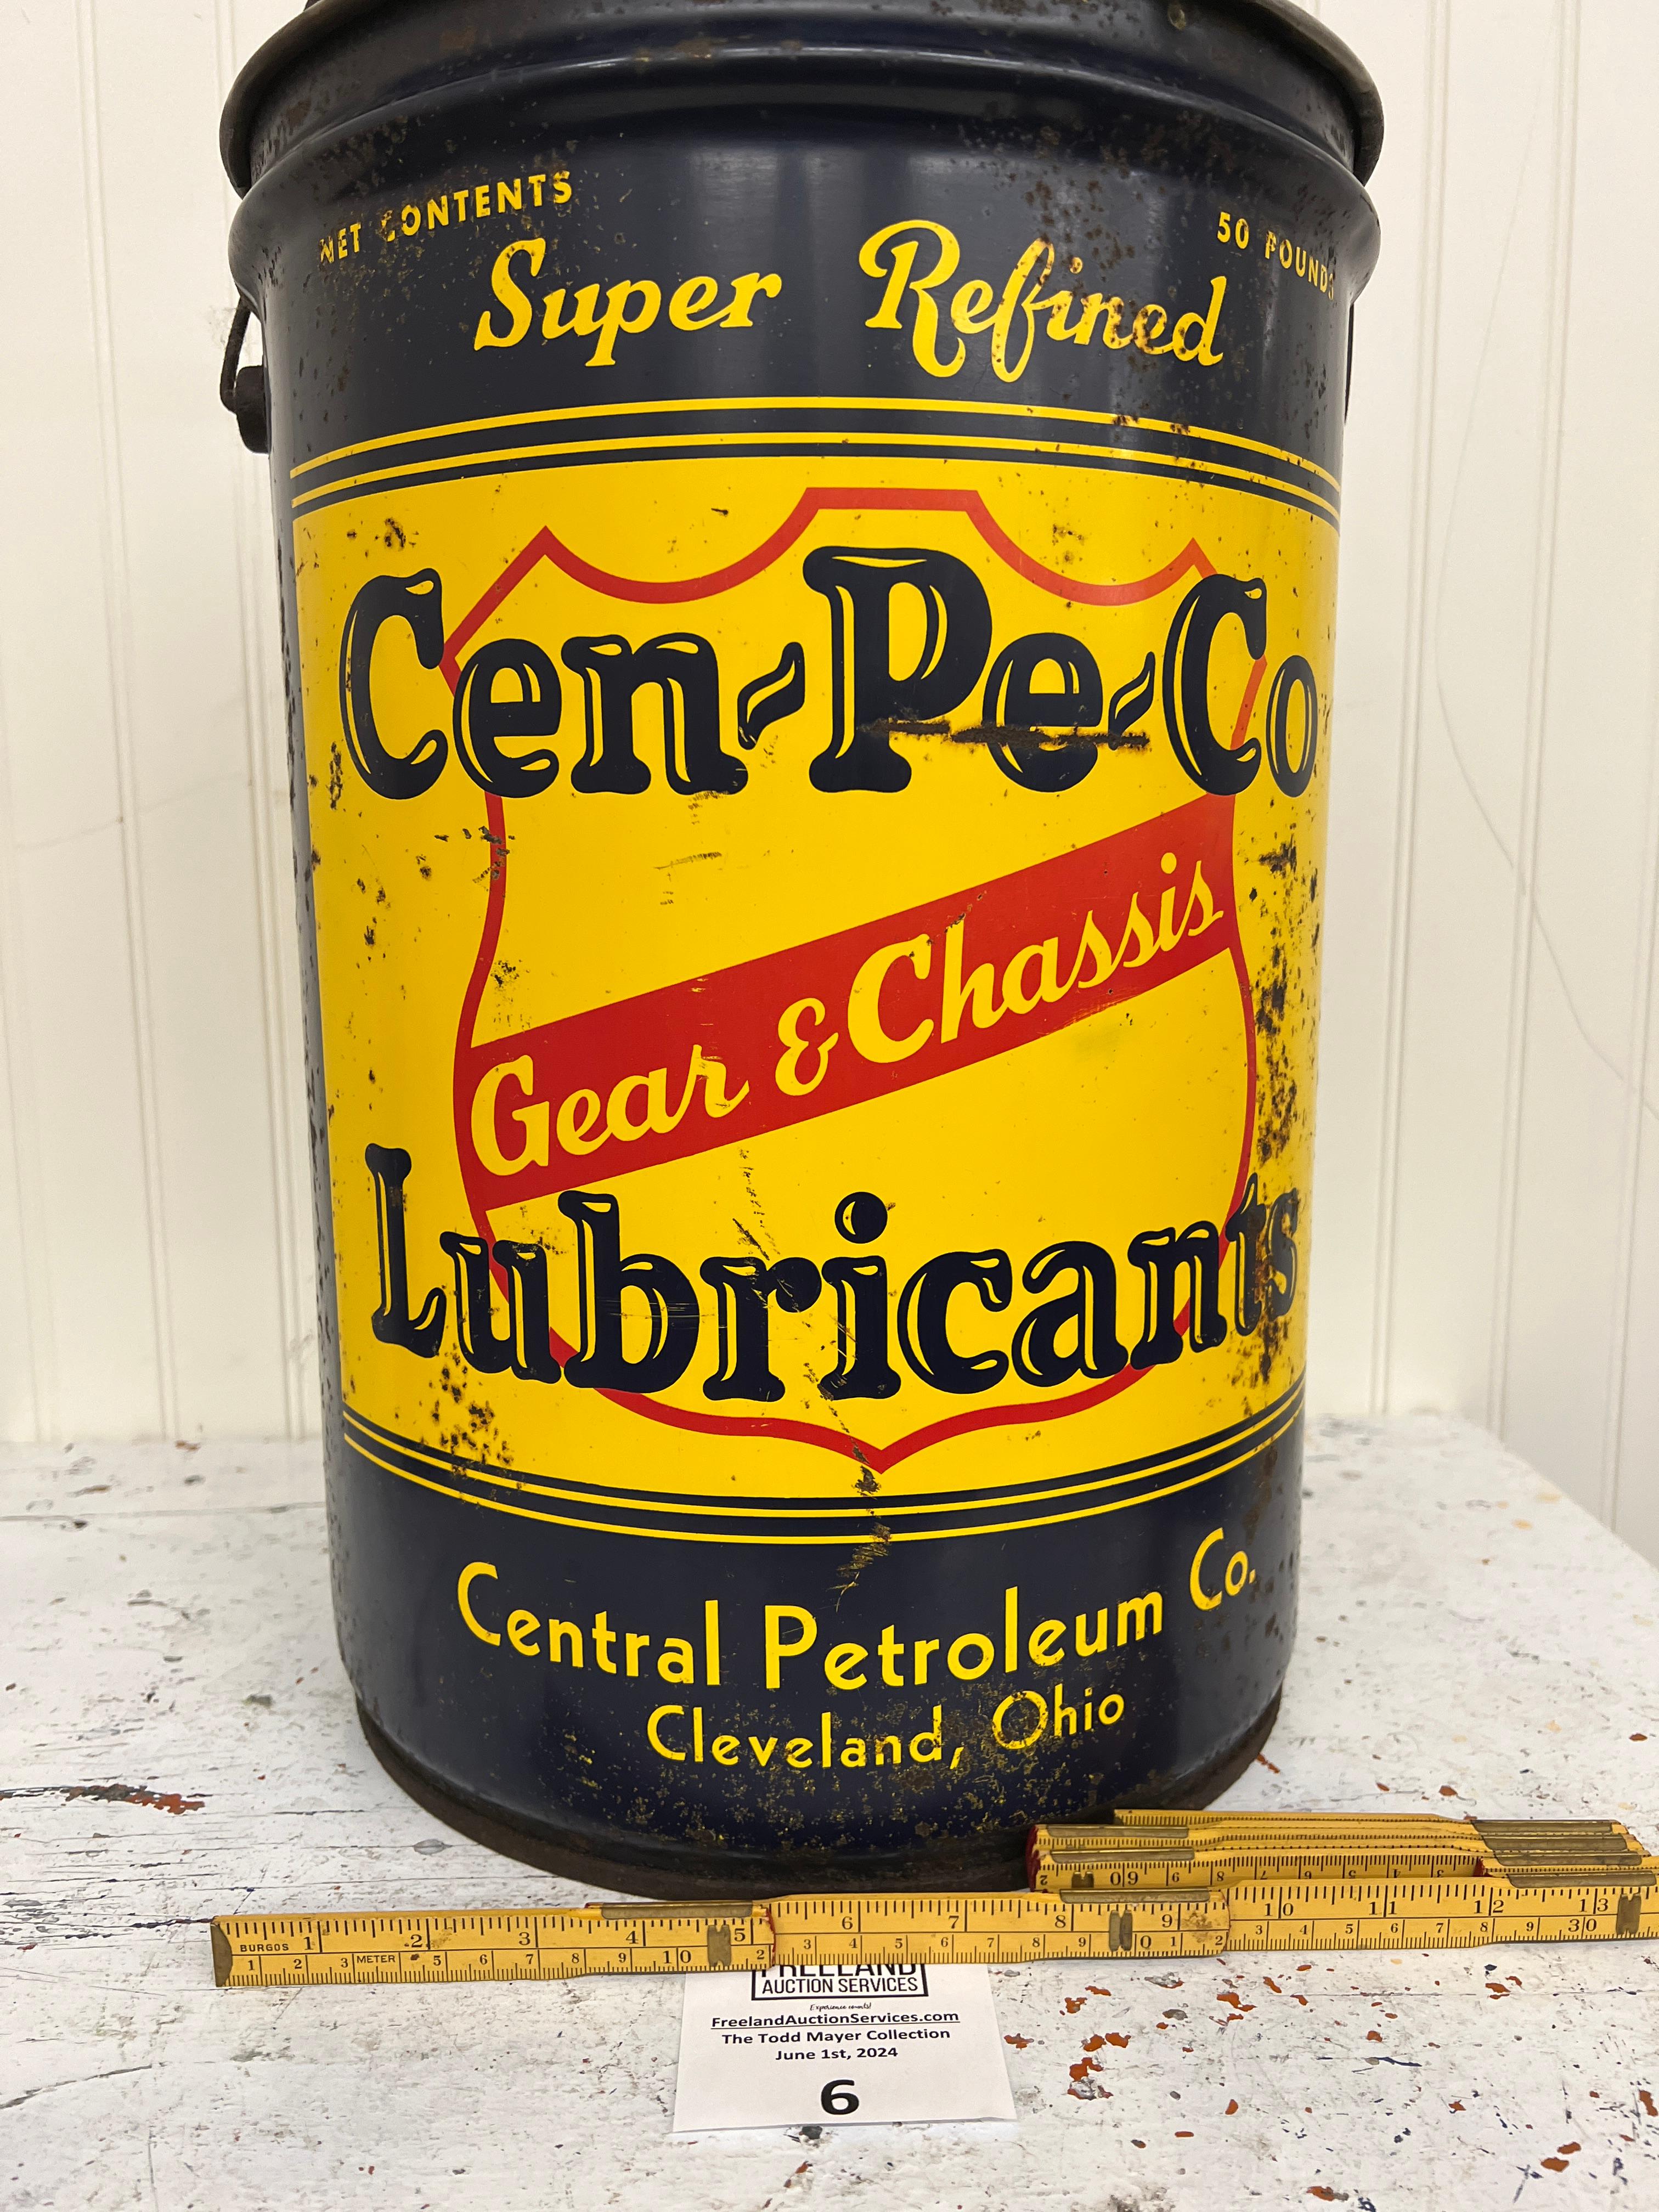 Cen-Pe-Co Lubricants GEAR & CHASSIS 50 lbs steel advertising can